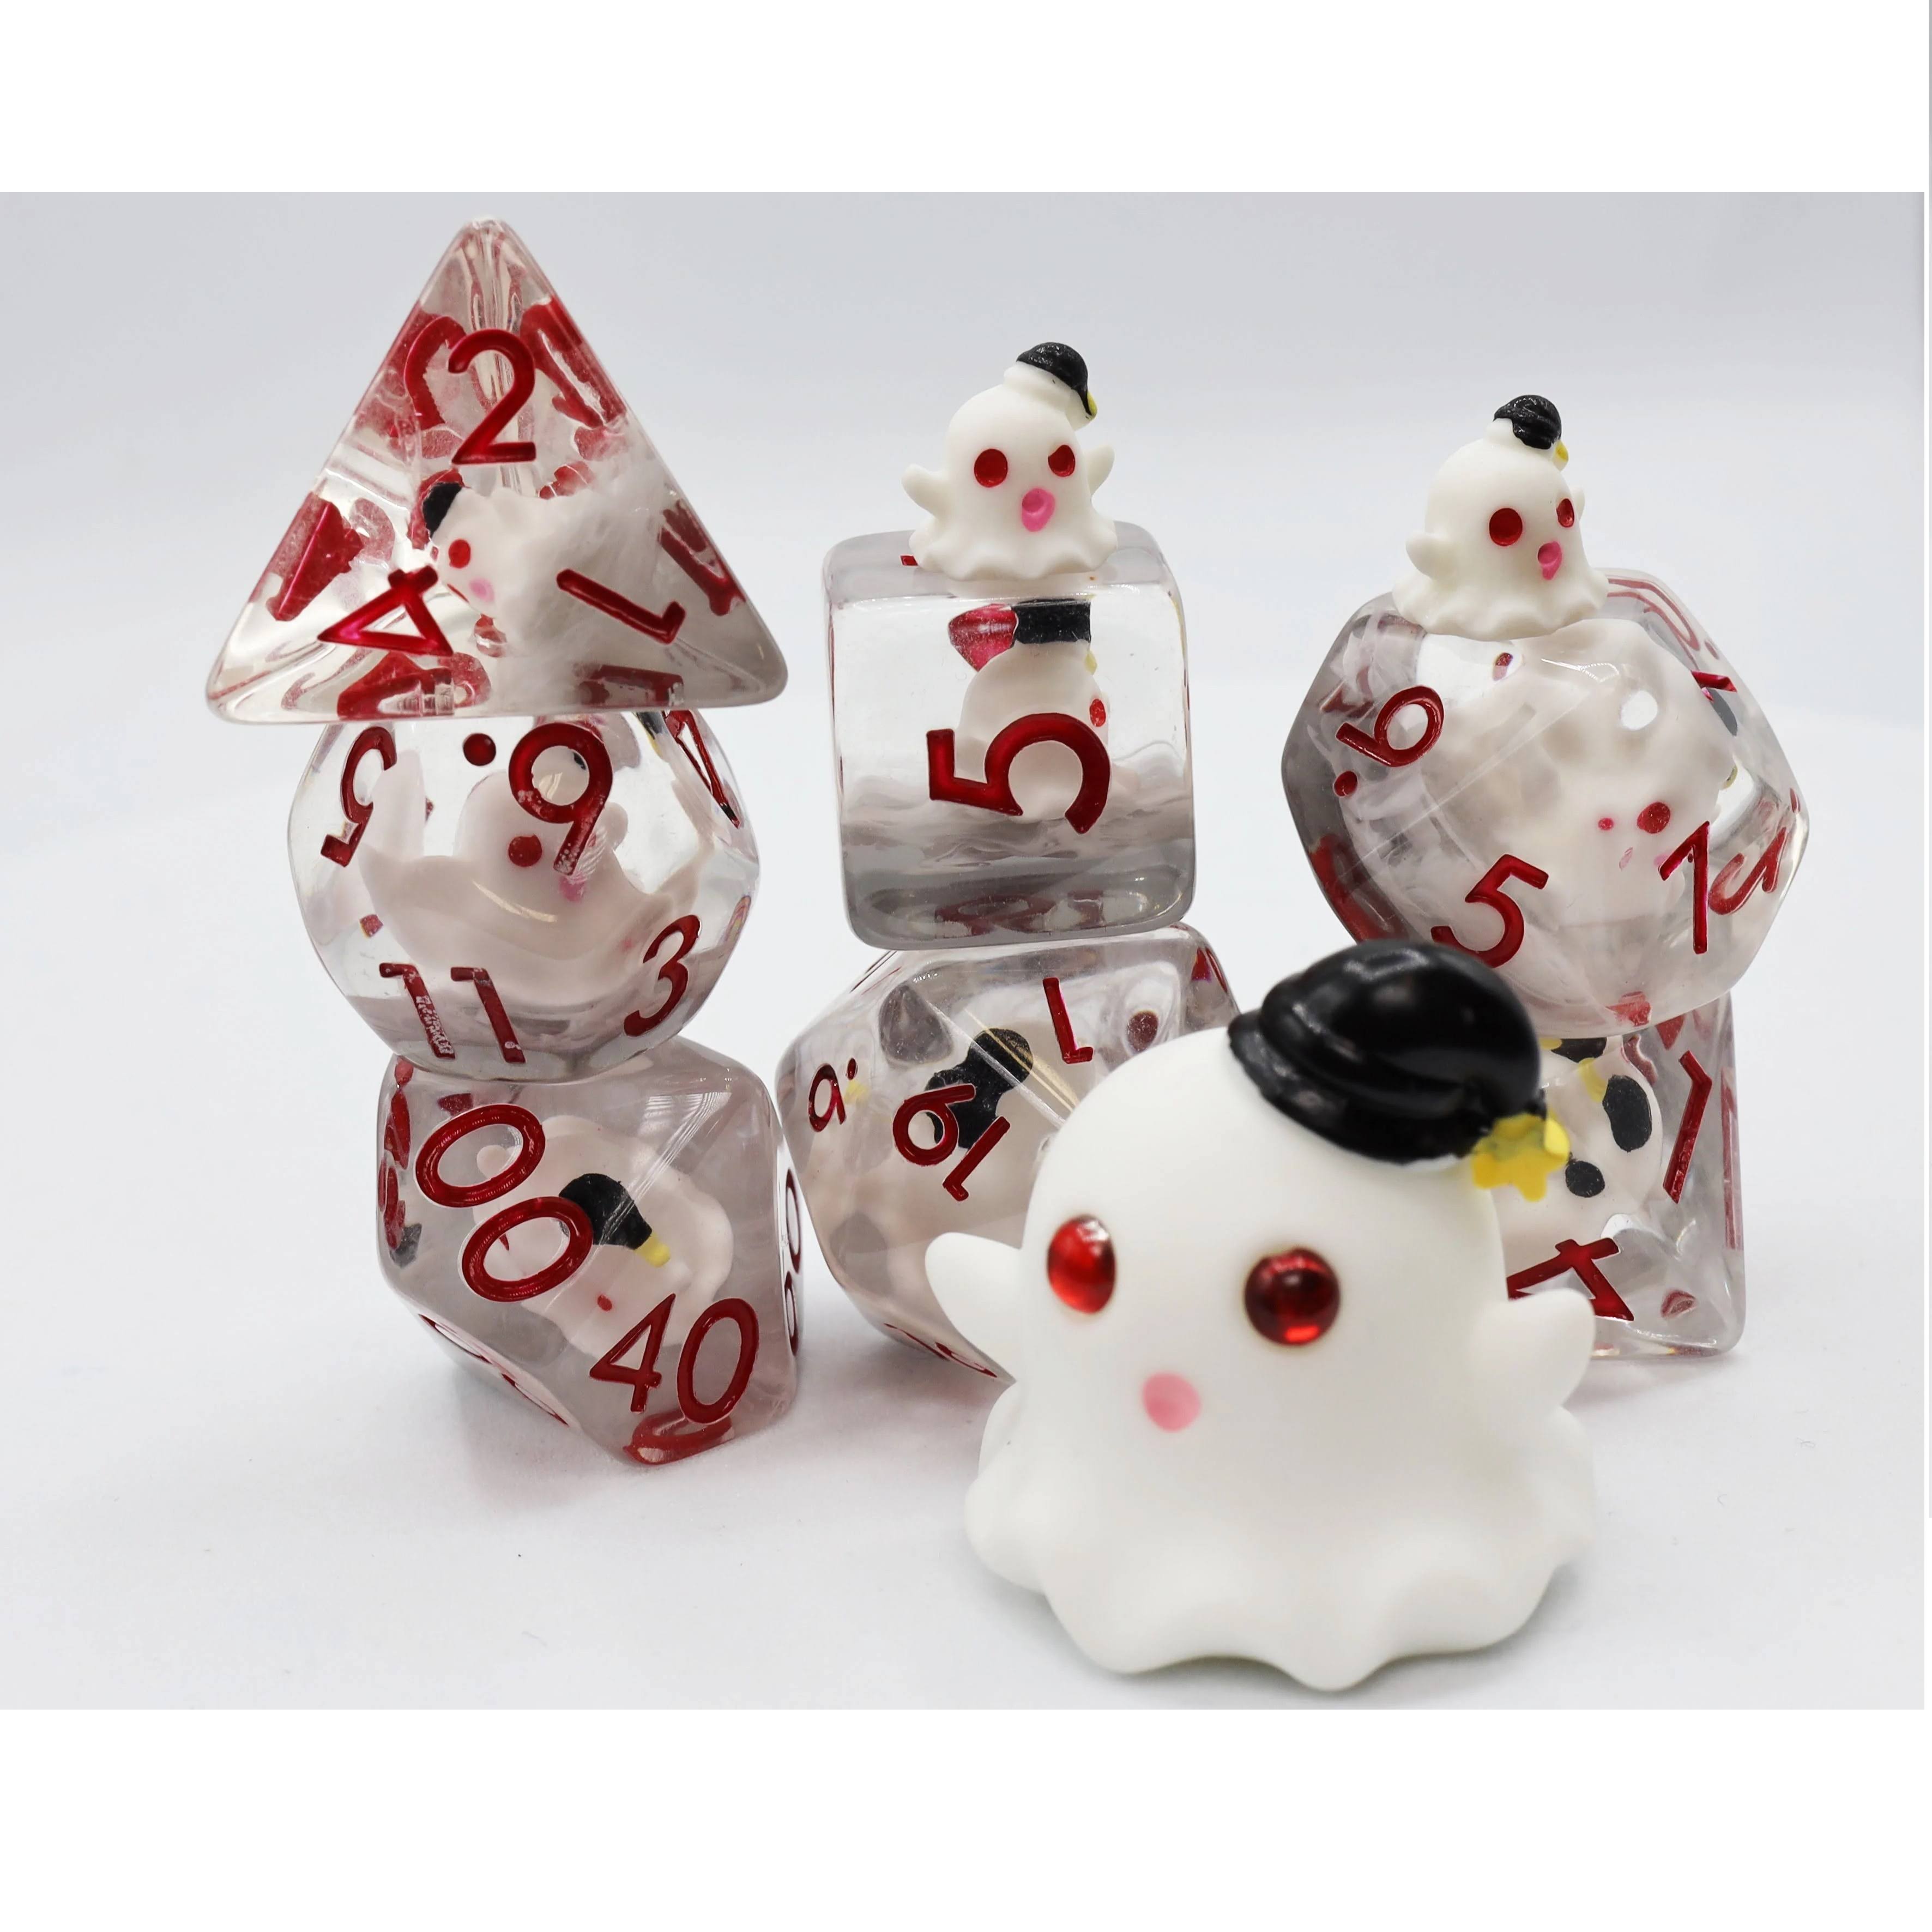 Dice and Gaming Accessories Polyhedral RPG Sets Stuff-Inside Sleepy Ghost (7)